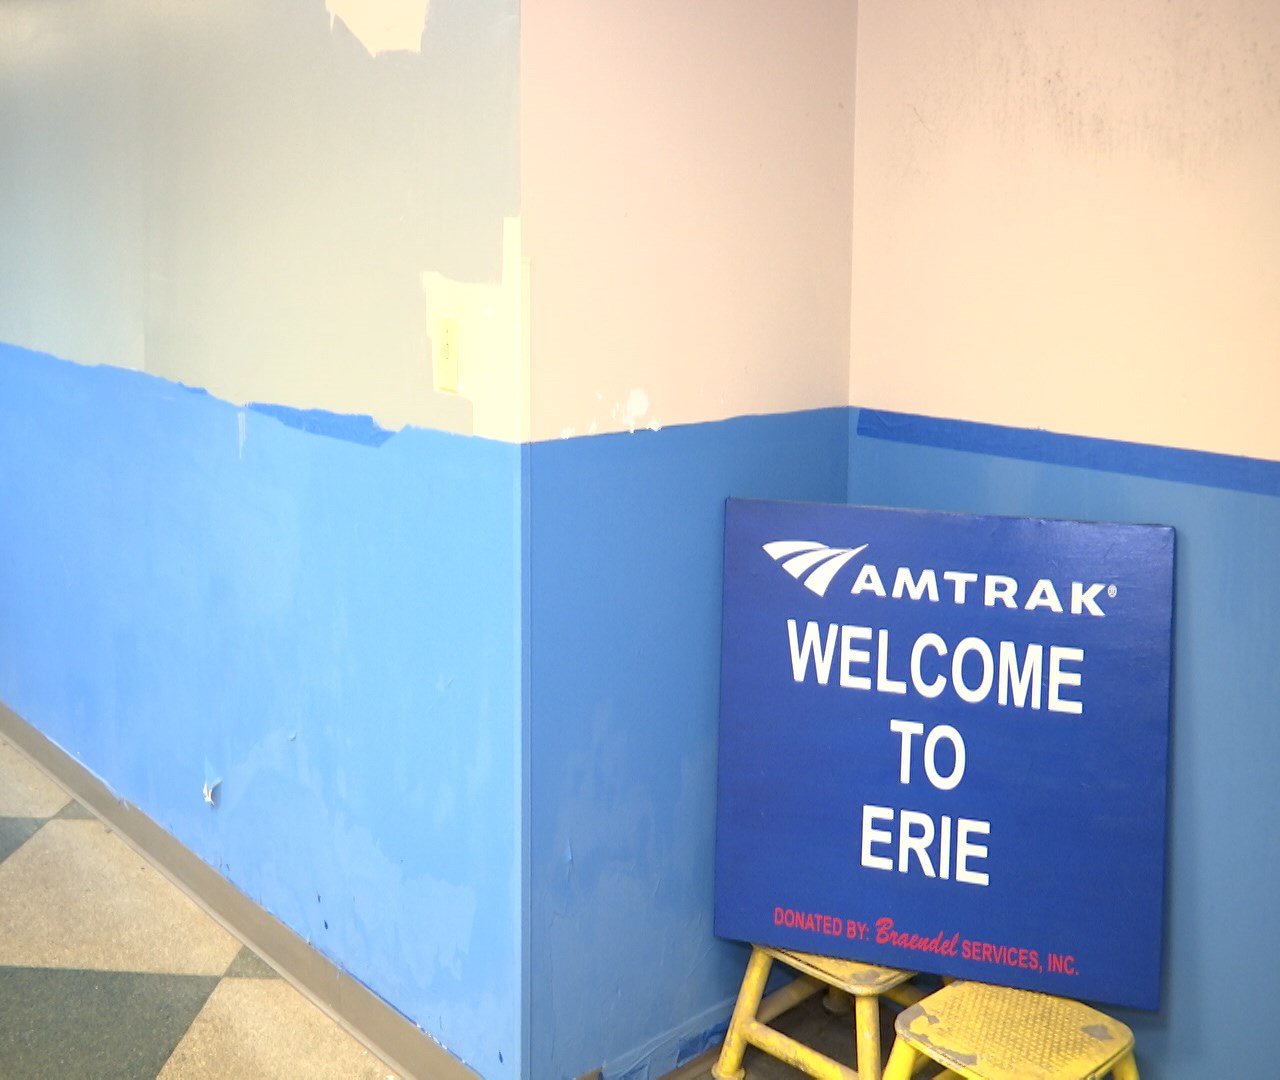 Update: Renovations in the Works for Amtrak Train Station